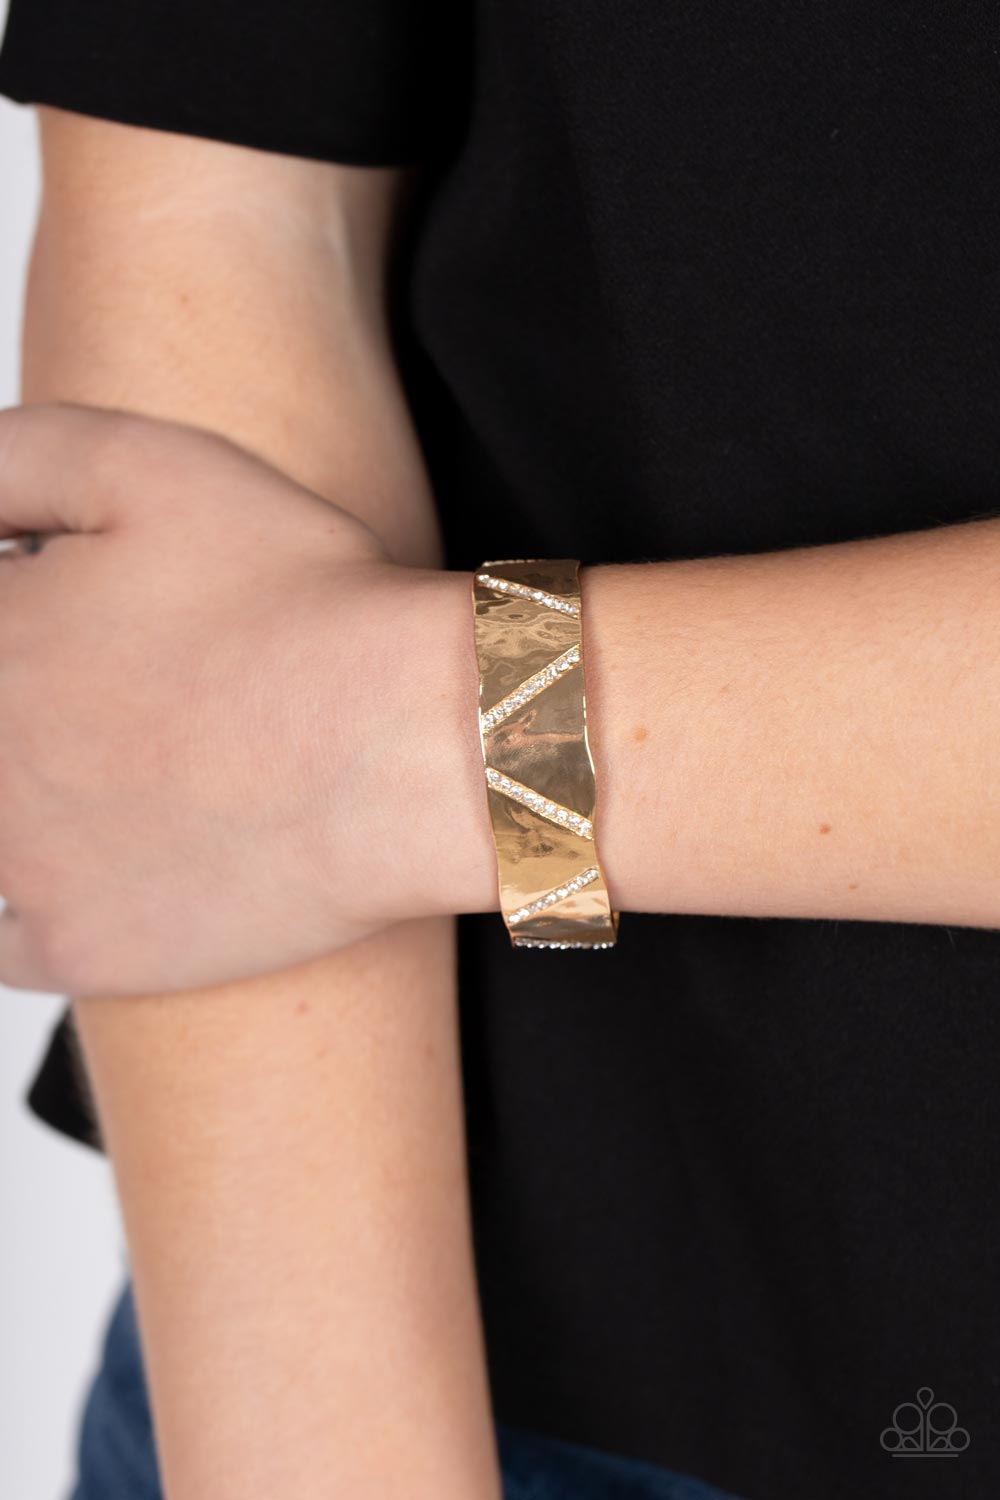 Couture Crusher Gold Cuff Bracelet - Paparazzi Accessories Item #P9ED-GDXX-046XX Rows of glassy white rhinestones slant across the front of a gently hammered gold cuff that waves around the wrist, result in an edgy shimmer.  Sold as one individual bracelet.